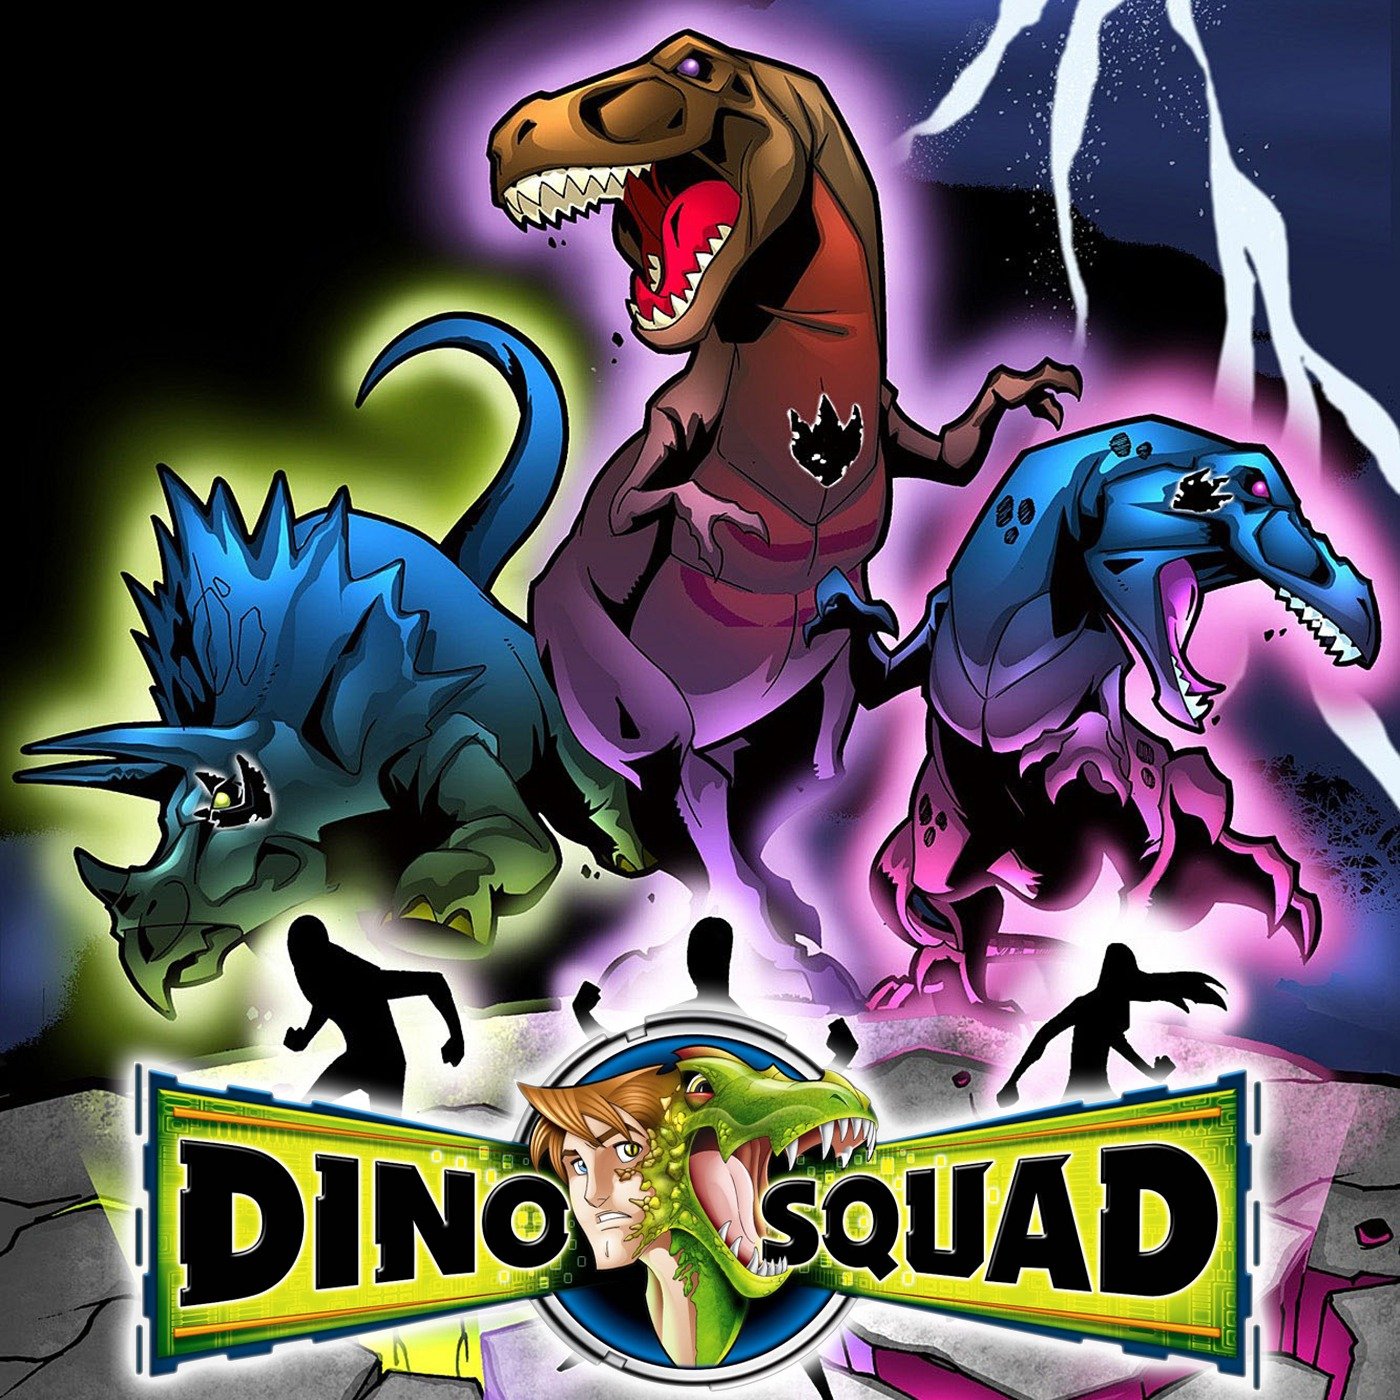 The Best Dinosaur Cartoons & Animated Series About Dinosaurs, Ranked